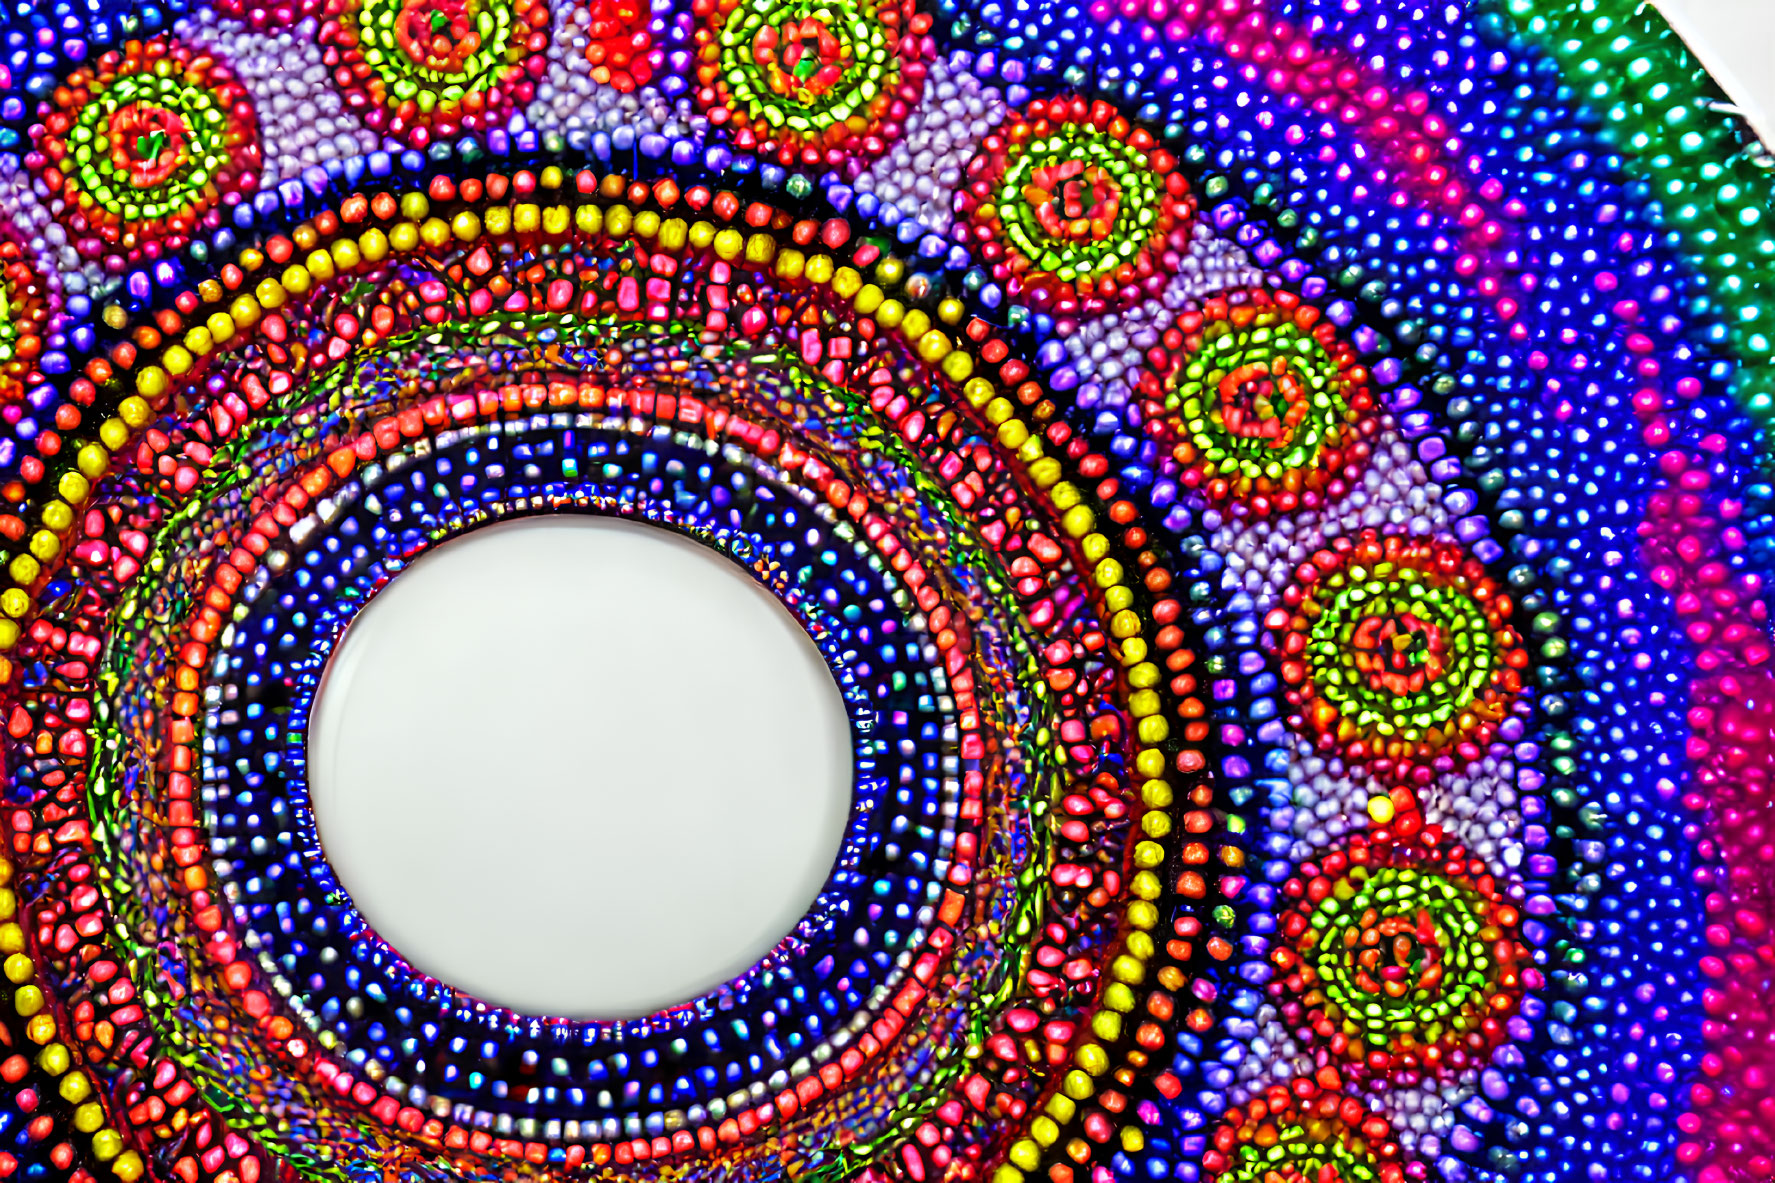 Colorful Mandala Pattern with Bead-like Details in Rainbow Hues